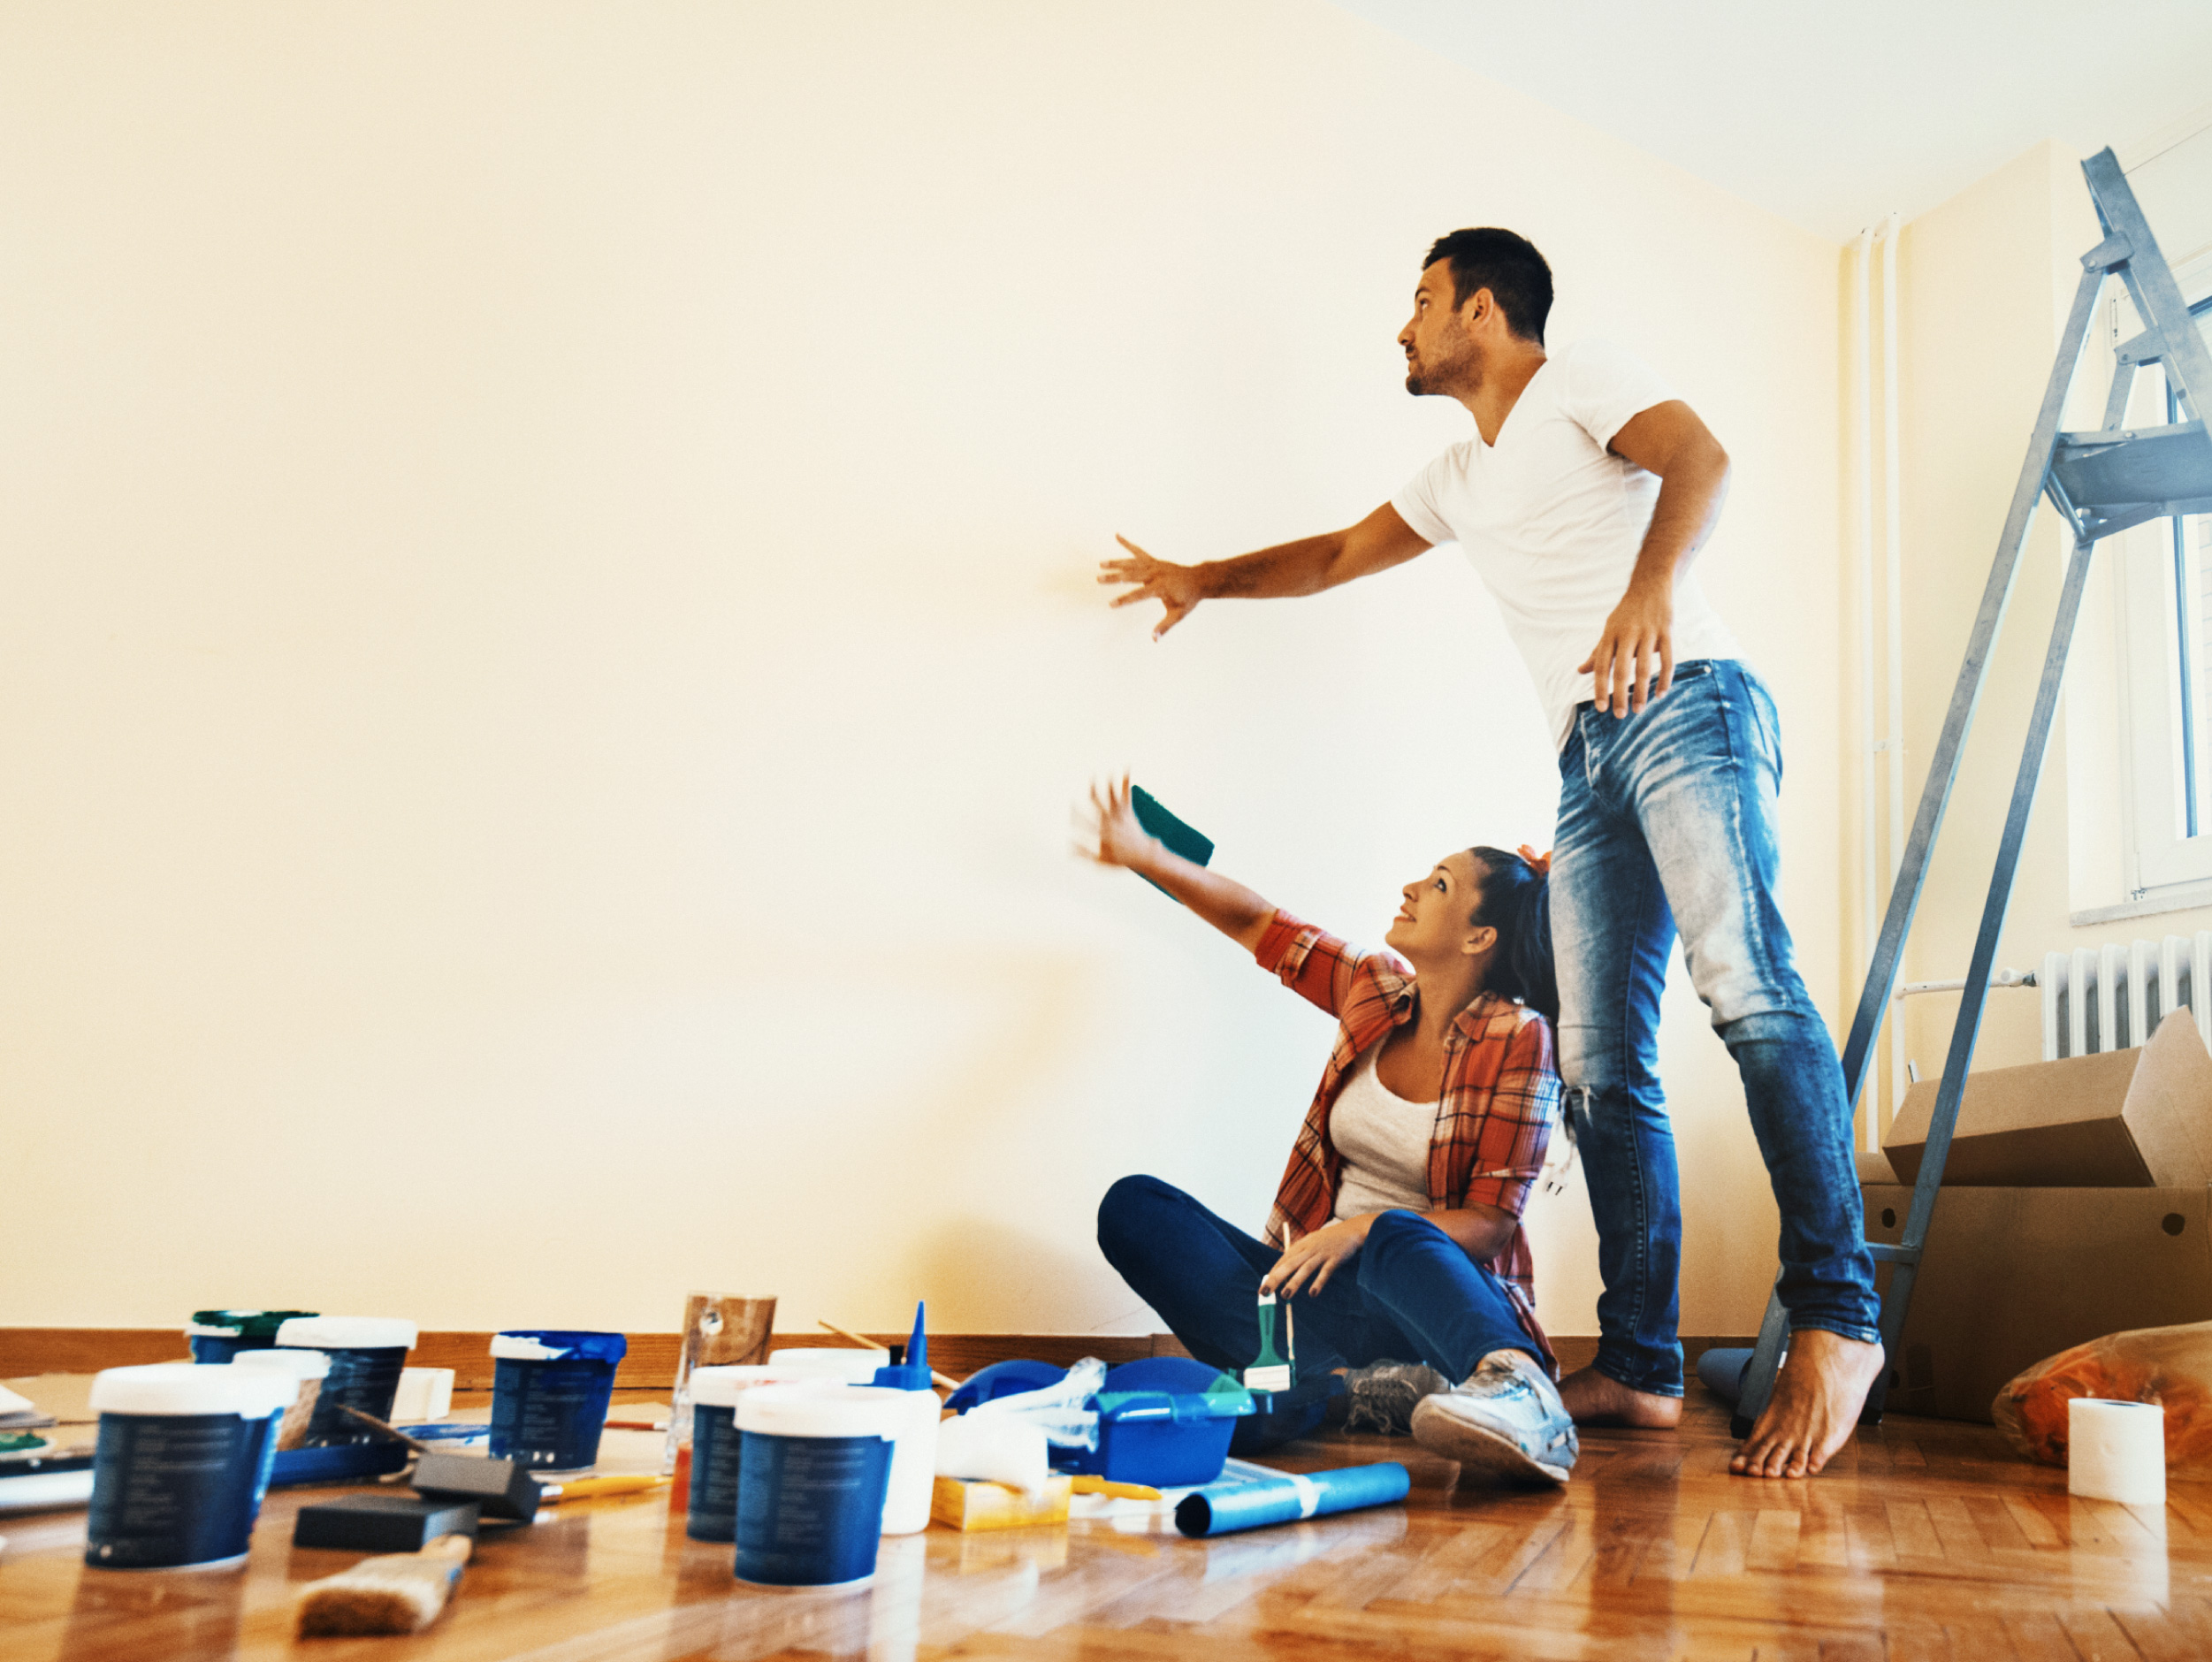 Home Improvement Companies are Enhancing Consumer Experience